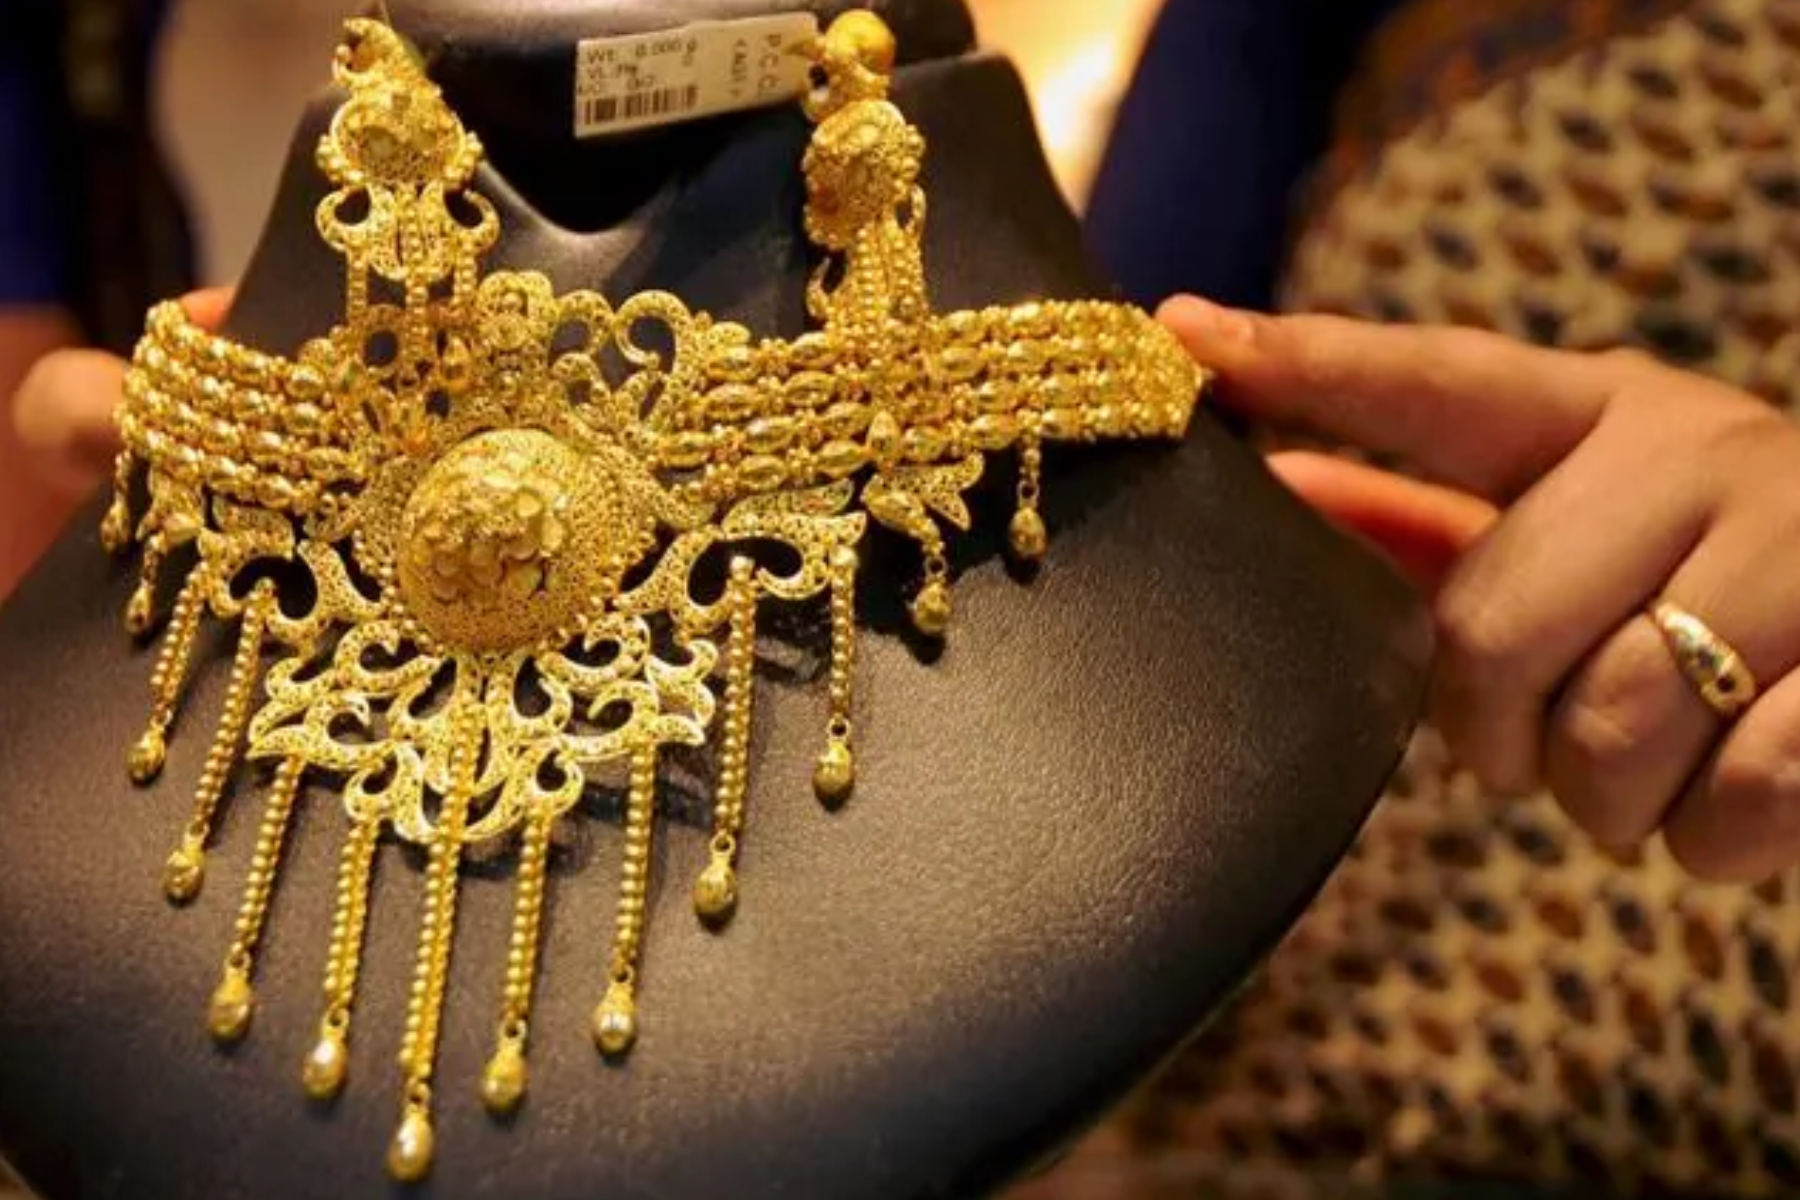 A gold necklace with extremely detailed structures